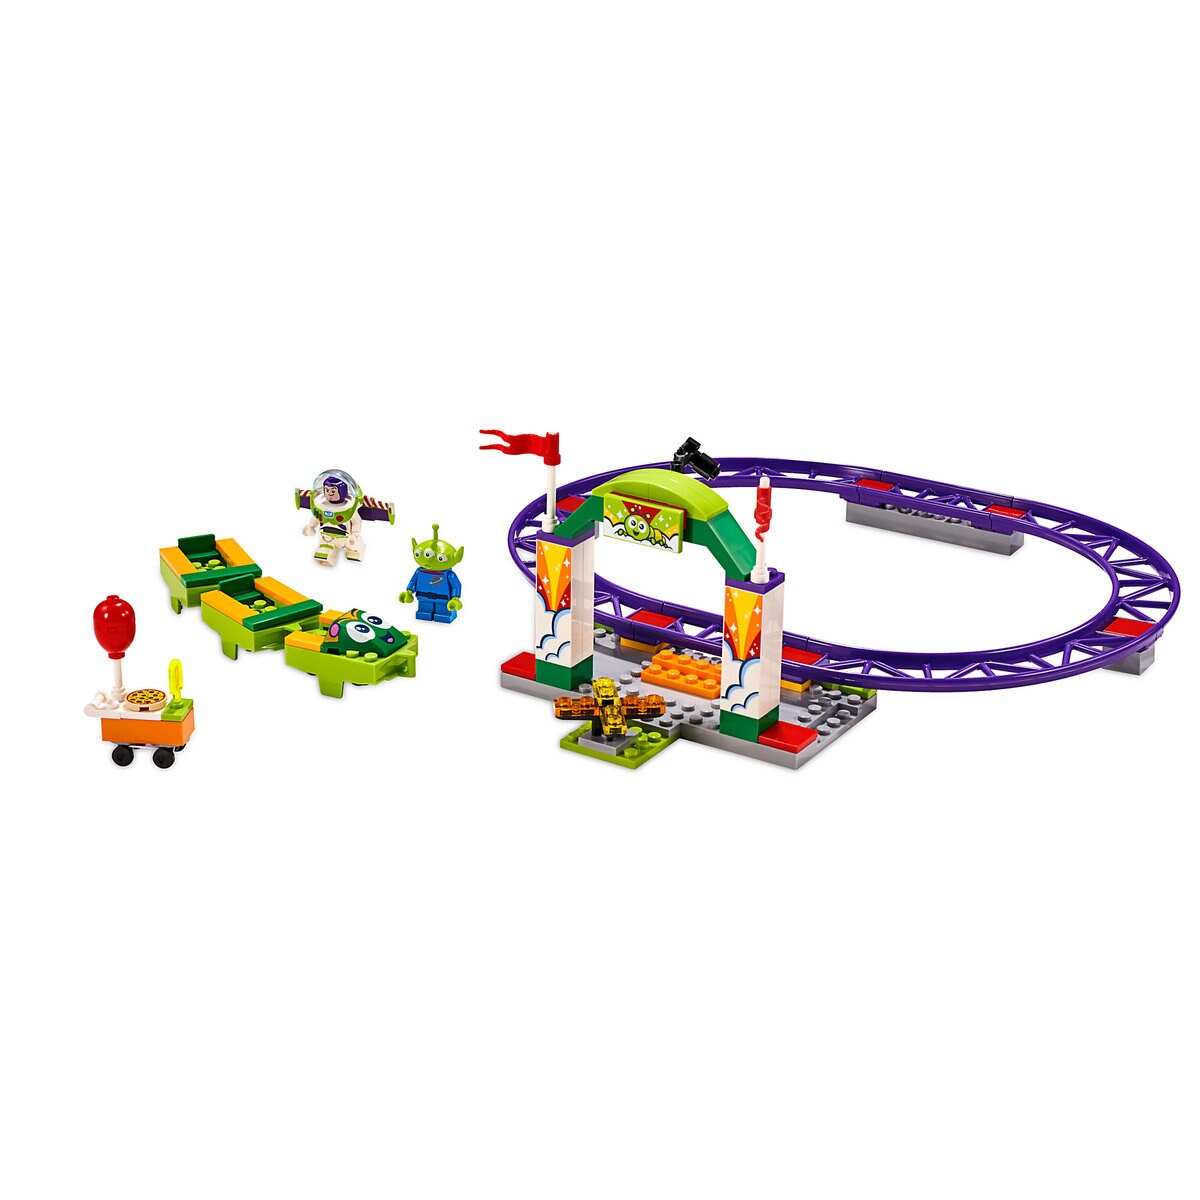 Product Image of Toy Story 4 Carnival Thrill Coaster Play Set by LEGO # 1